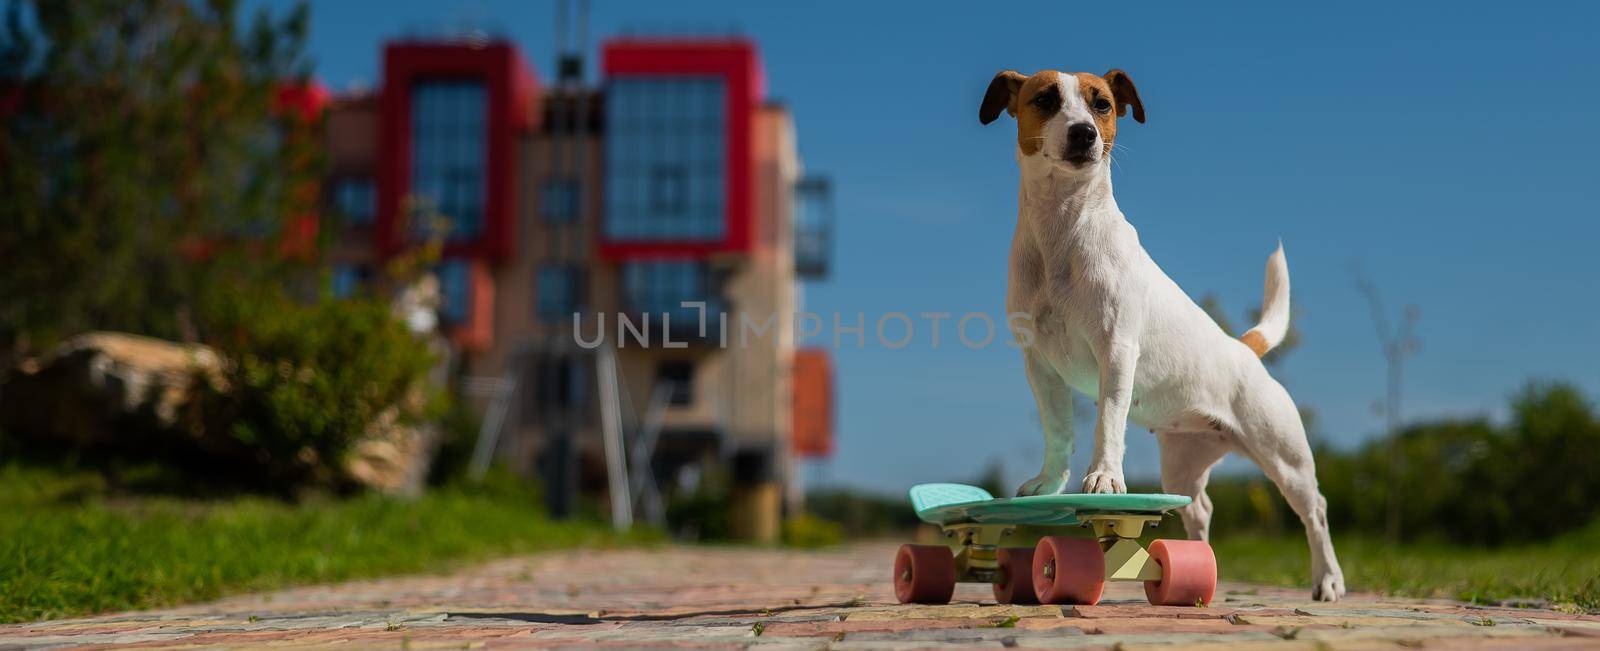 Jack russell terrier dog rides a penny board outdoors. by mrwed54